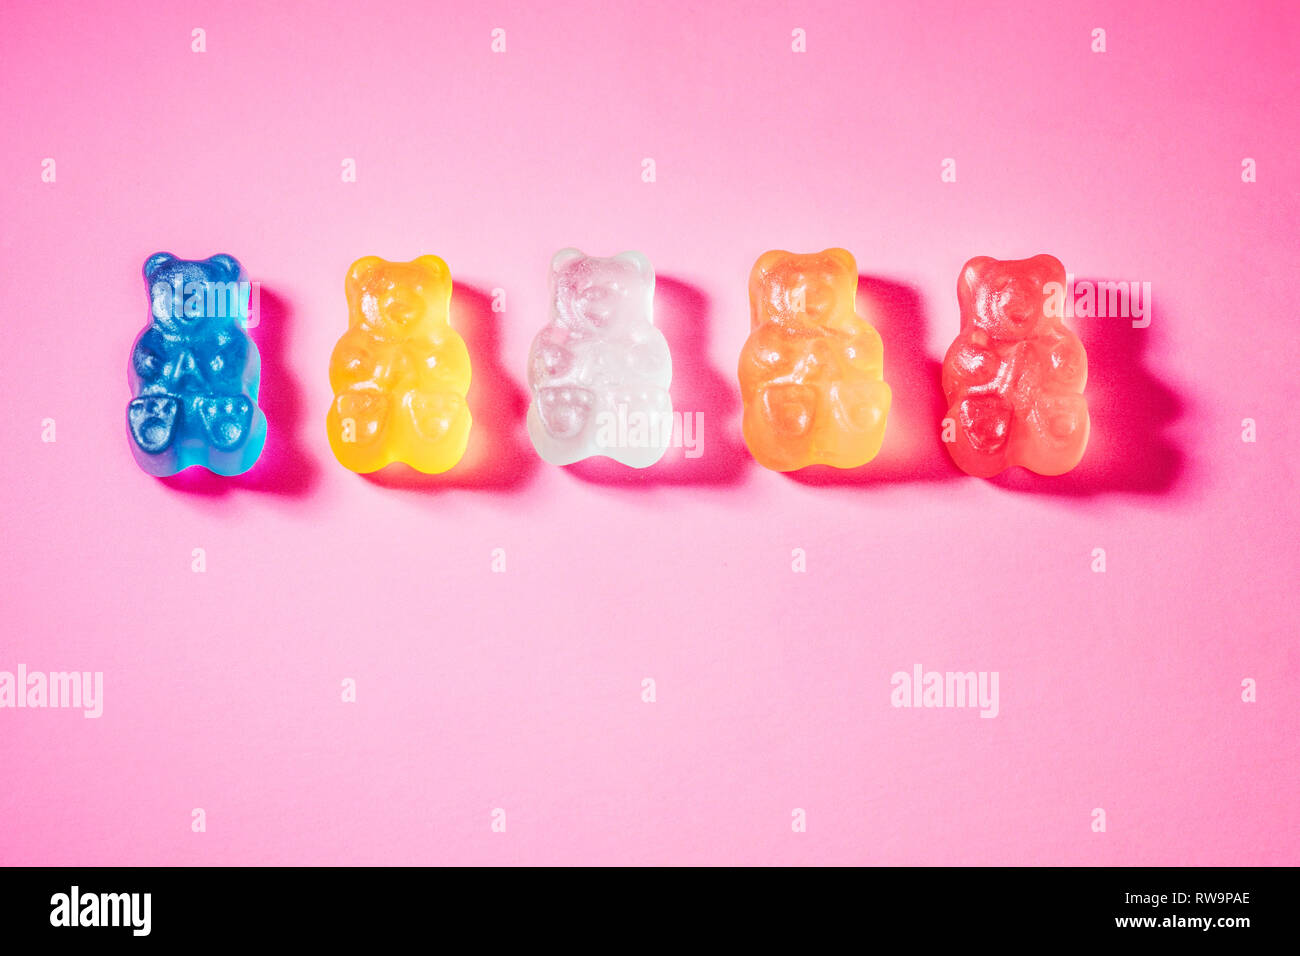 A close-up of five brightly-colored gummy bears, photographed on a pink background with poppy studio light. Stock Photo